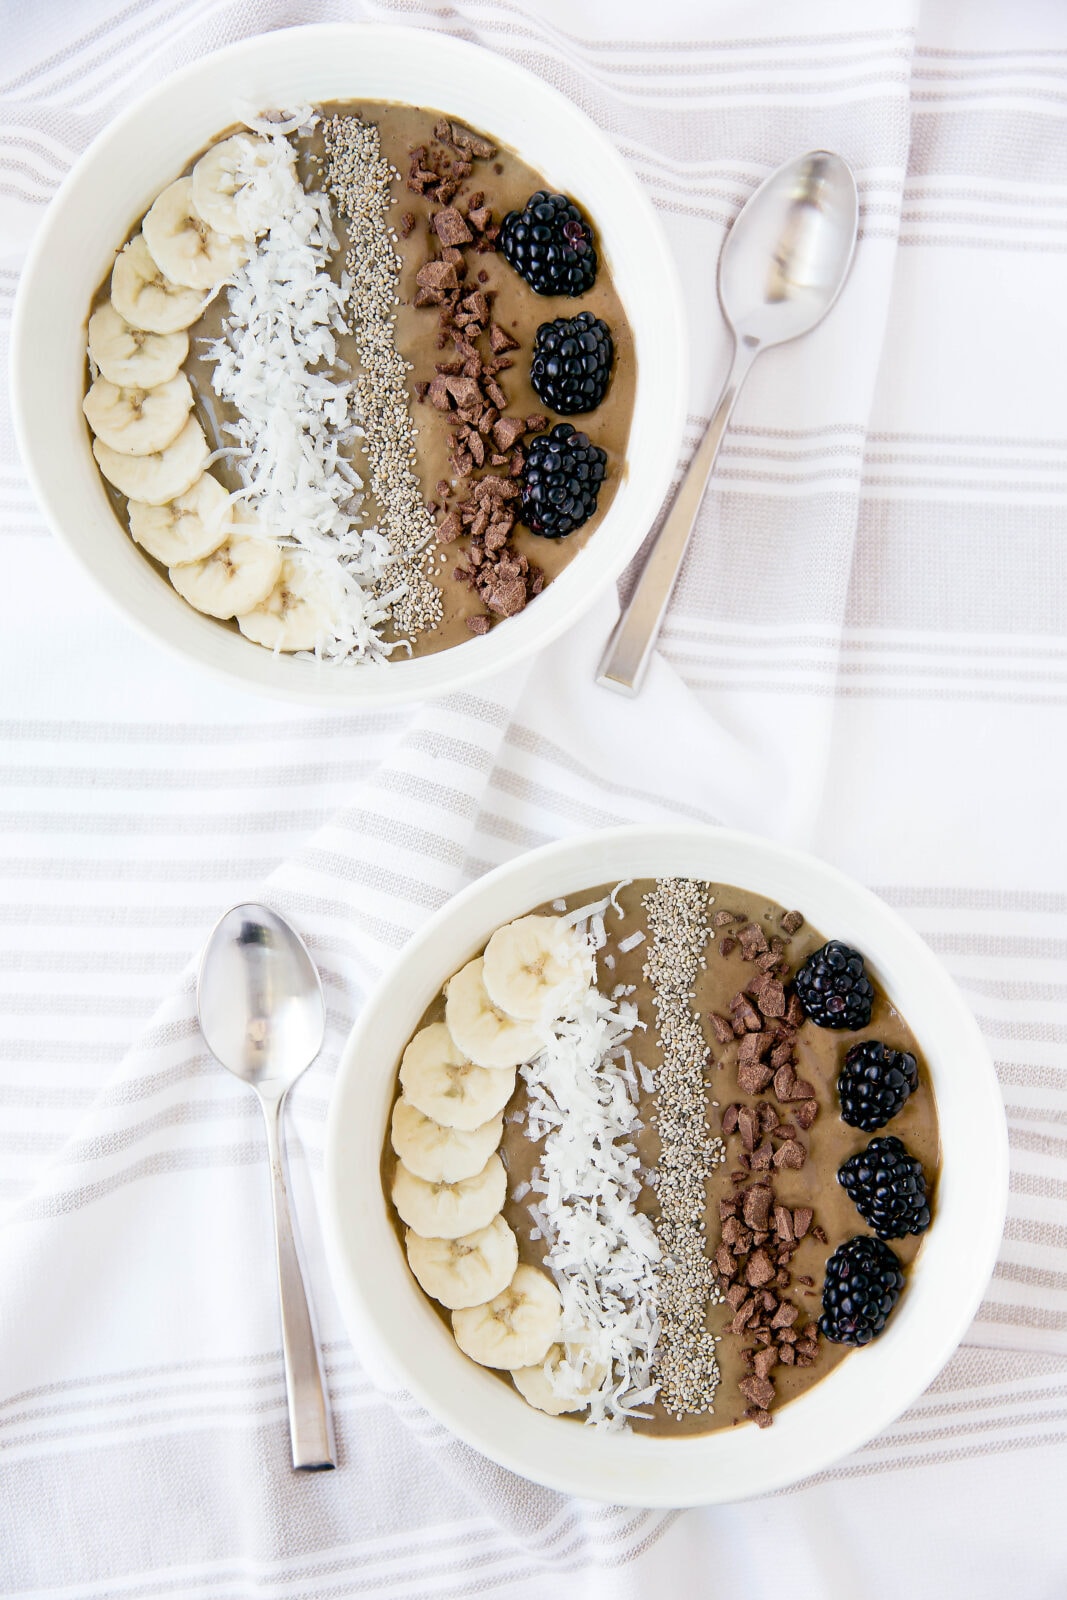 Gluten free, dairy free, refined sugar free, and packed with vitamins and nutrients, this Superfood Chocolate Smoothie Bowl is the new superhero of breakfast time.